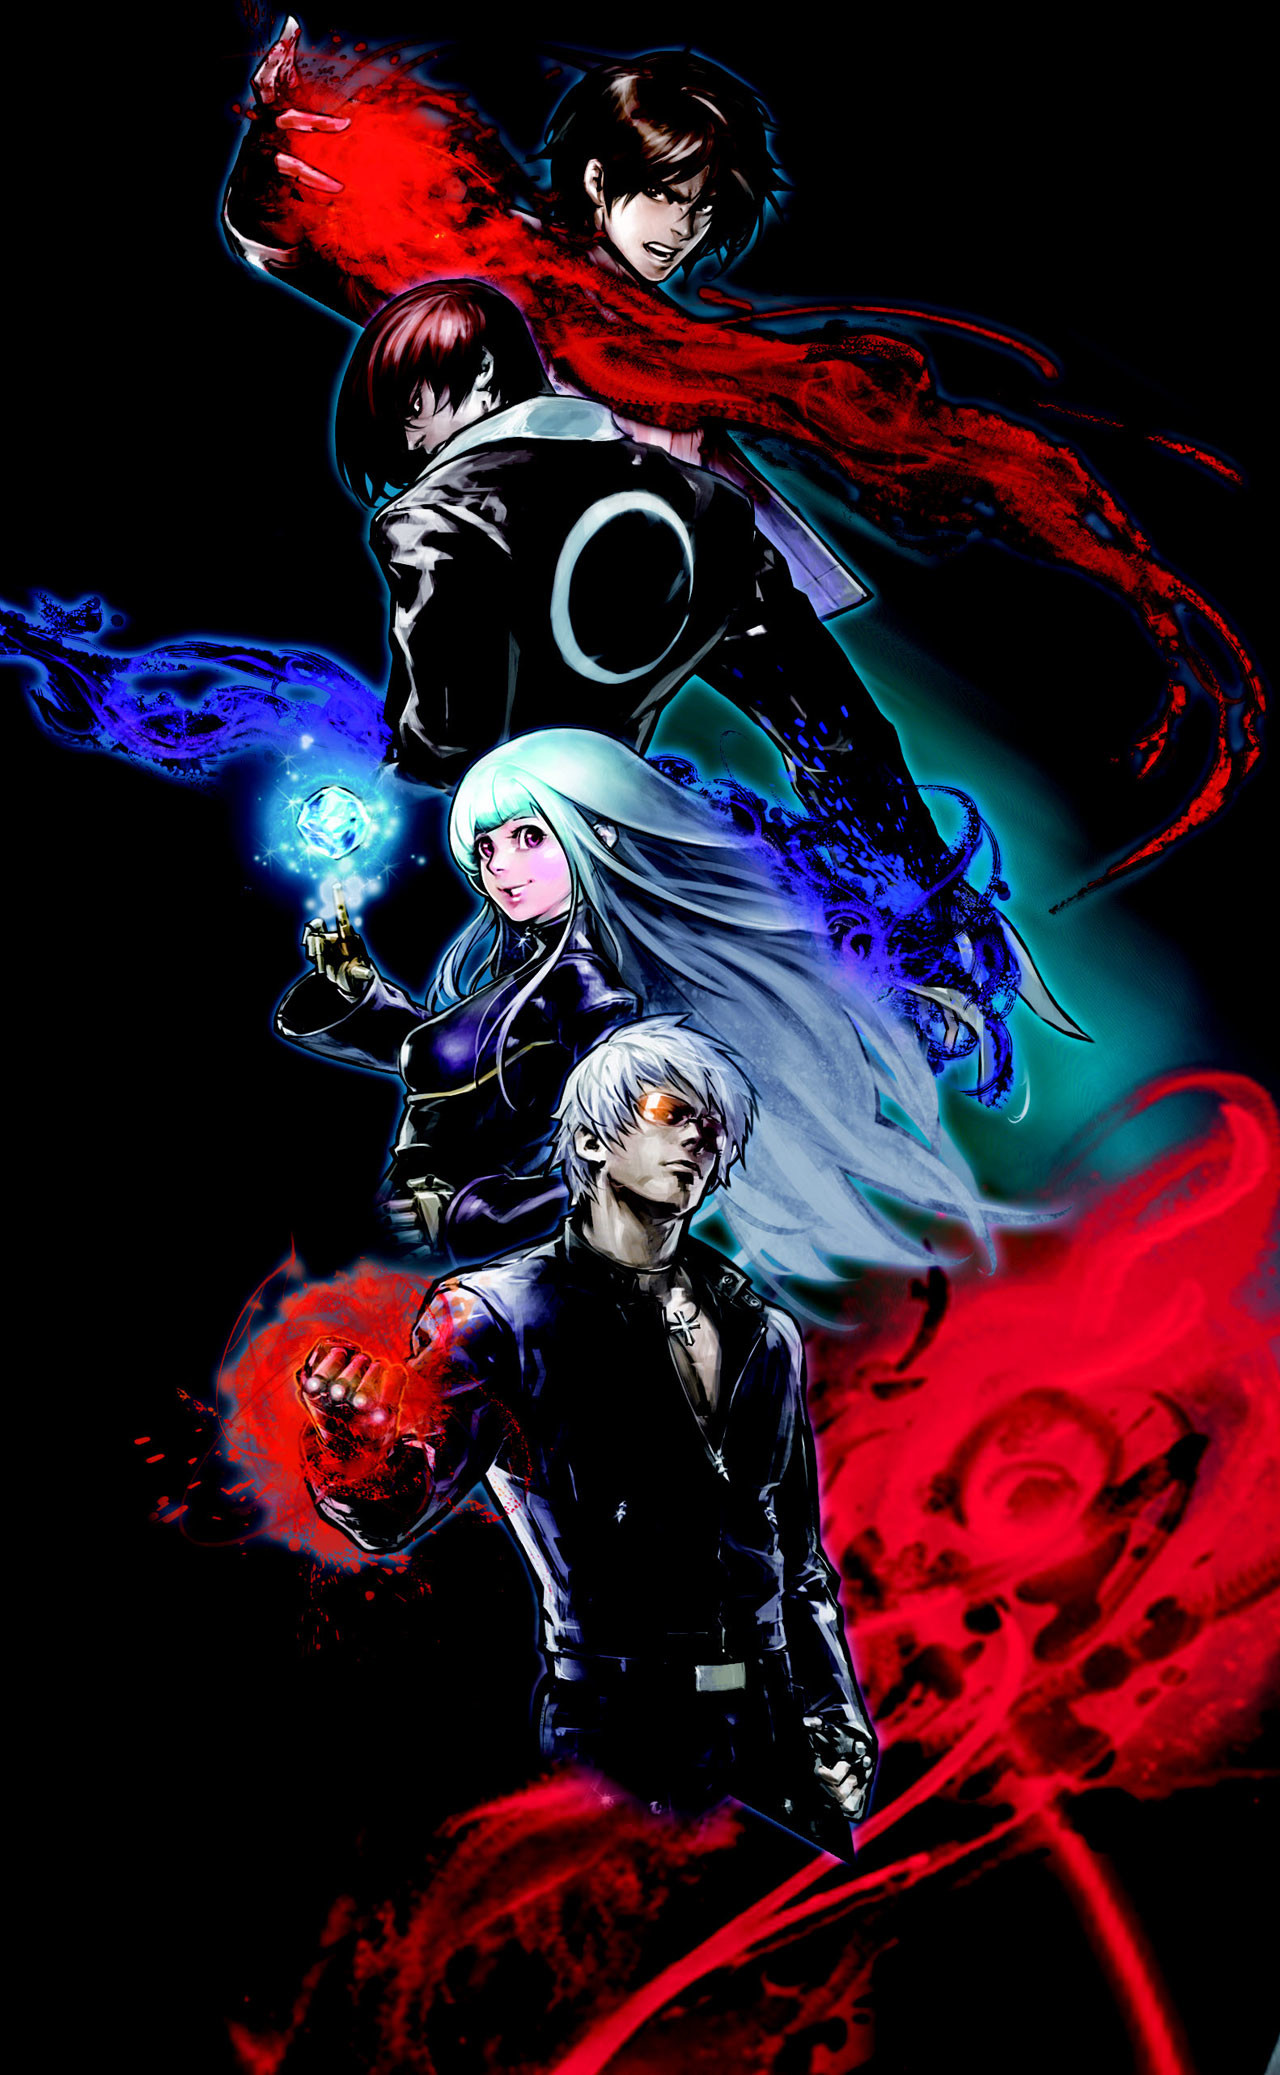 the king of fighters wallpaper,fictional character,illustration,graphic design,superhero,darkness